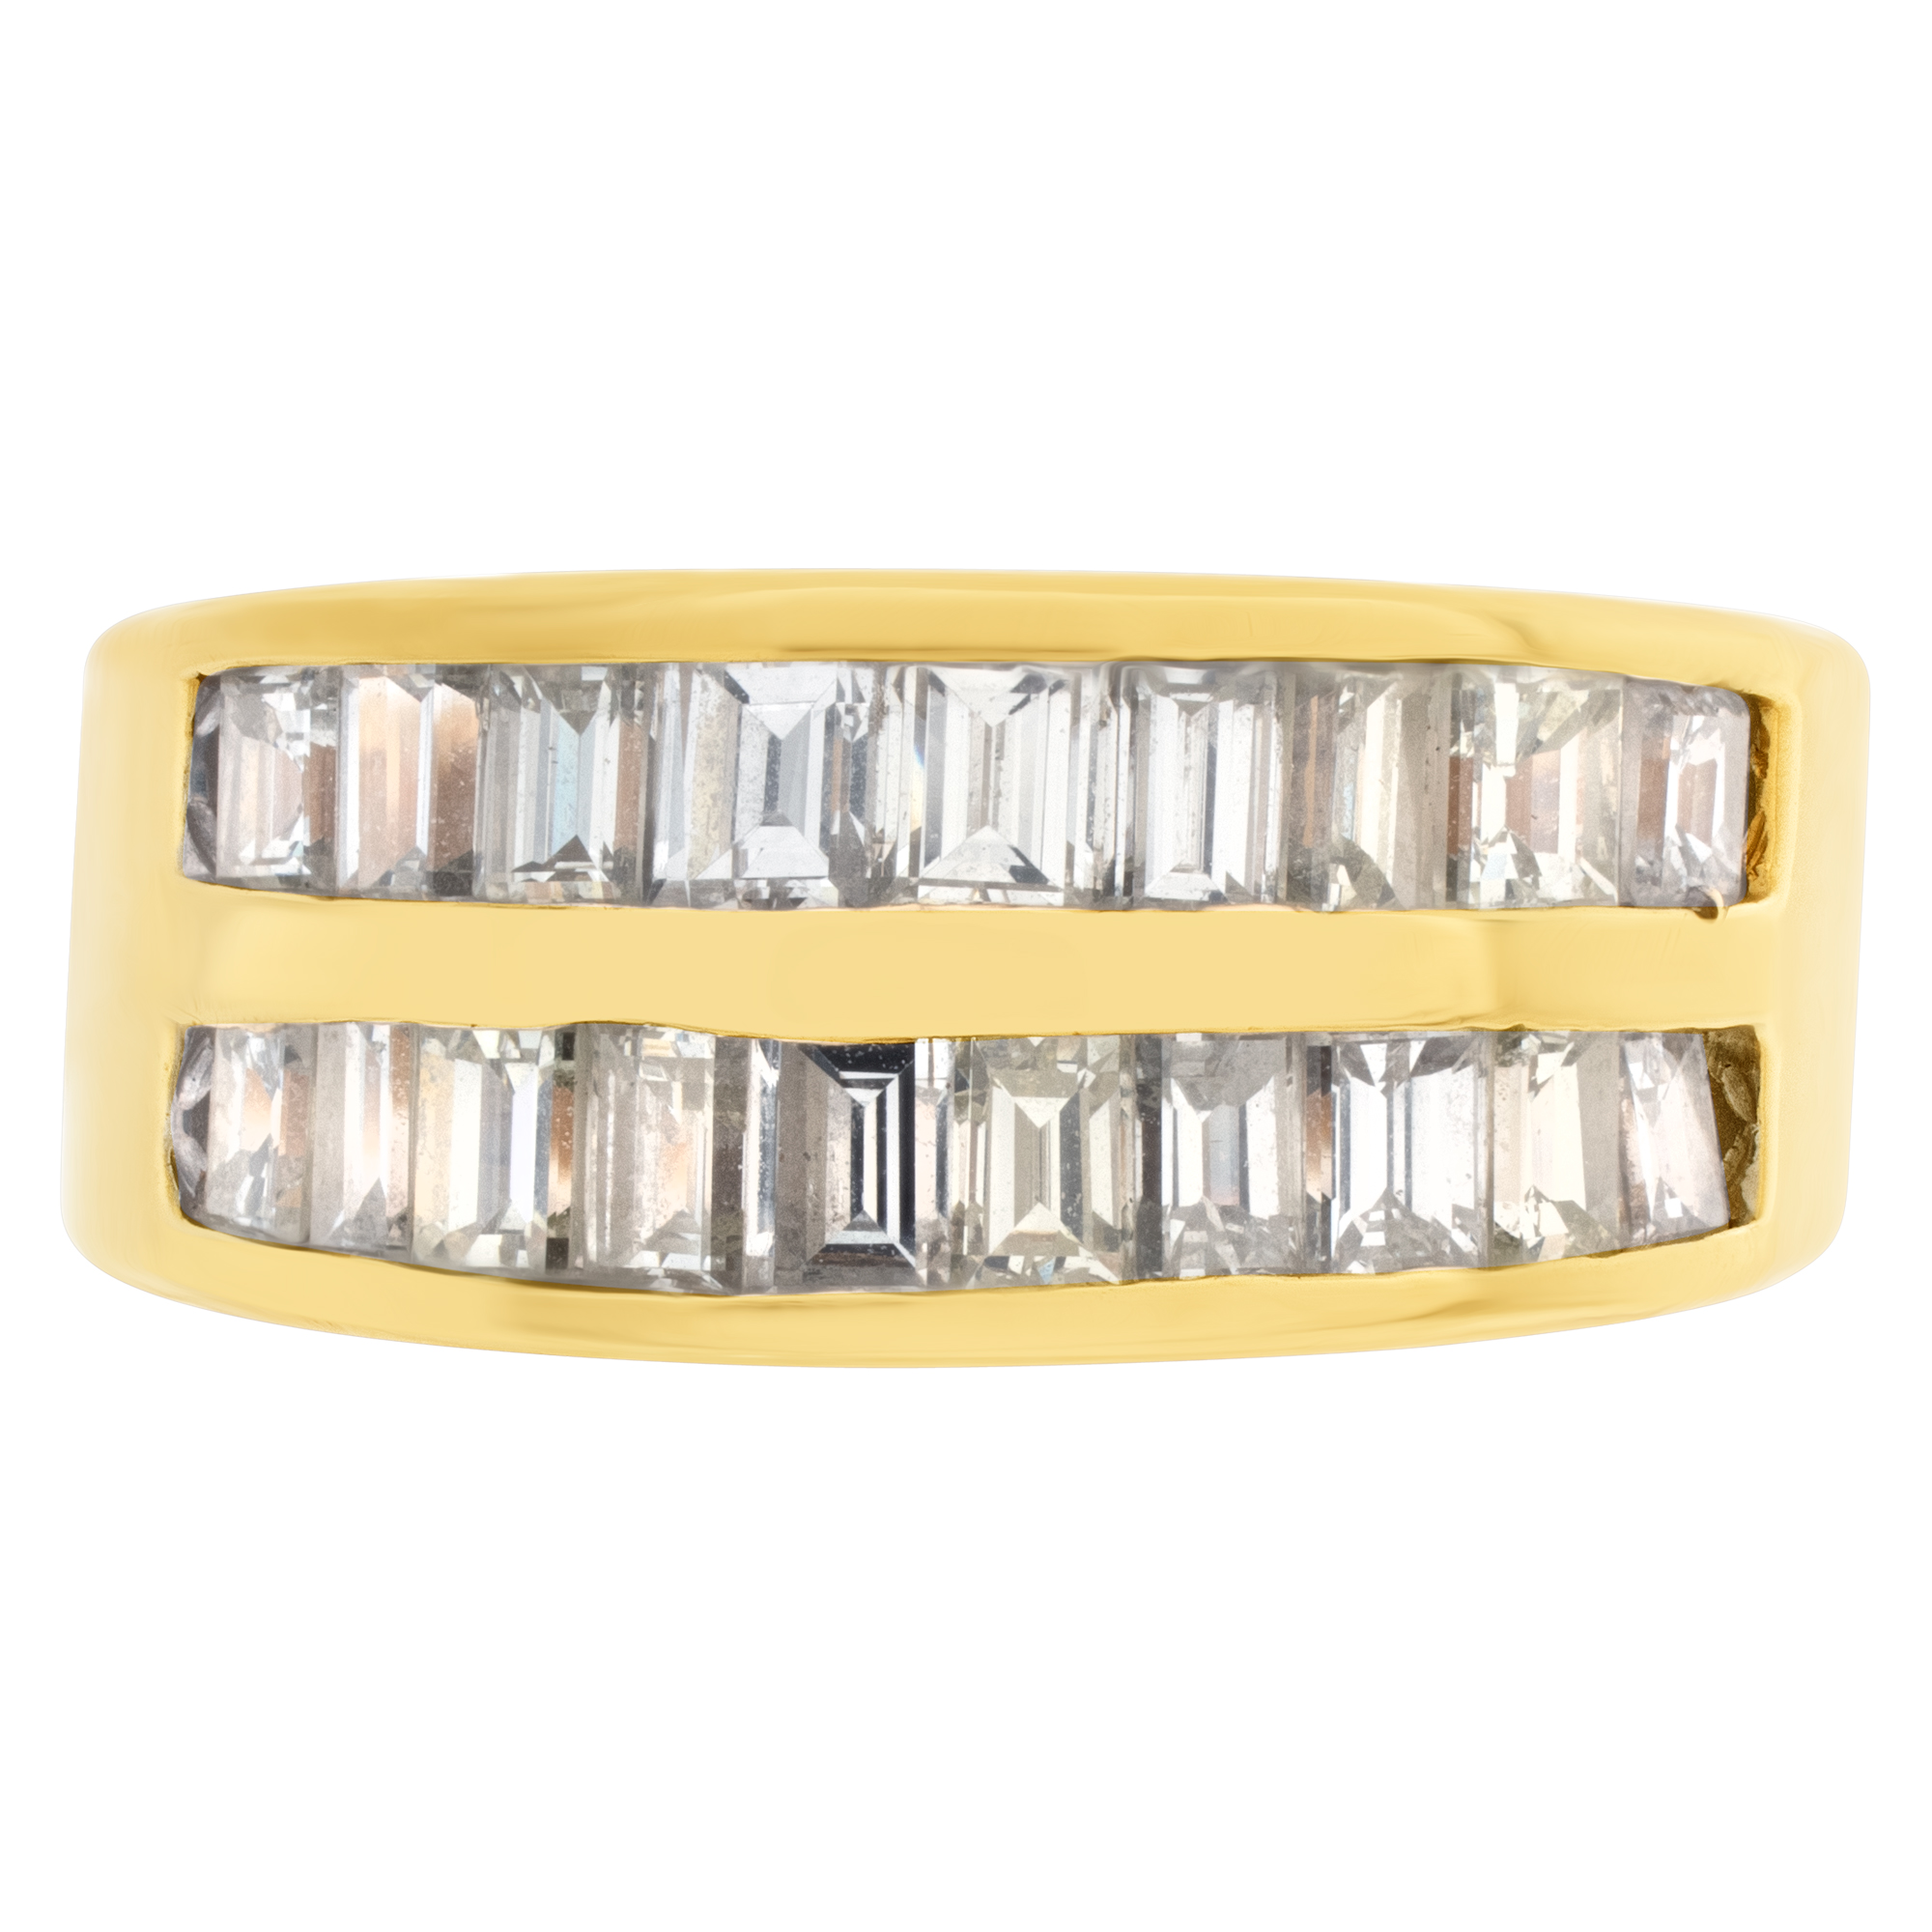 Diamond ring in 14k yellow gold with 2 rows of baguette diamonds image 2